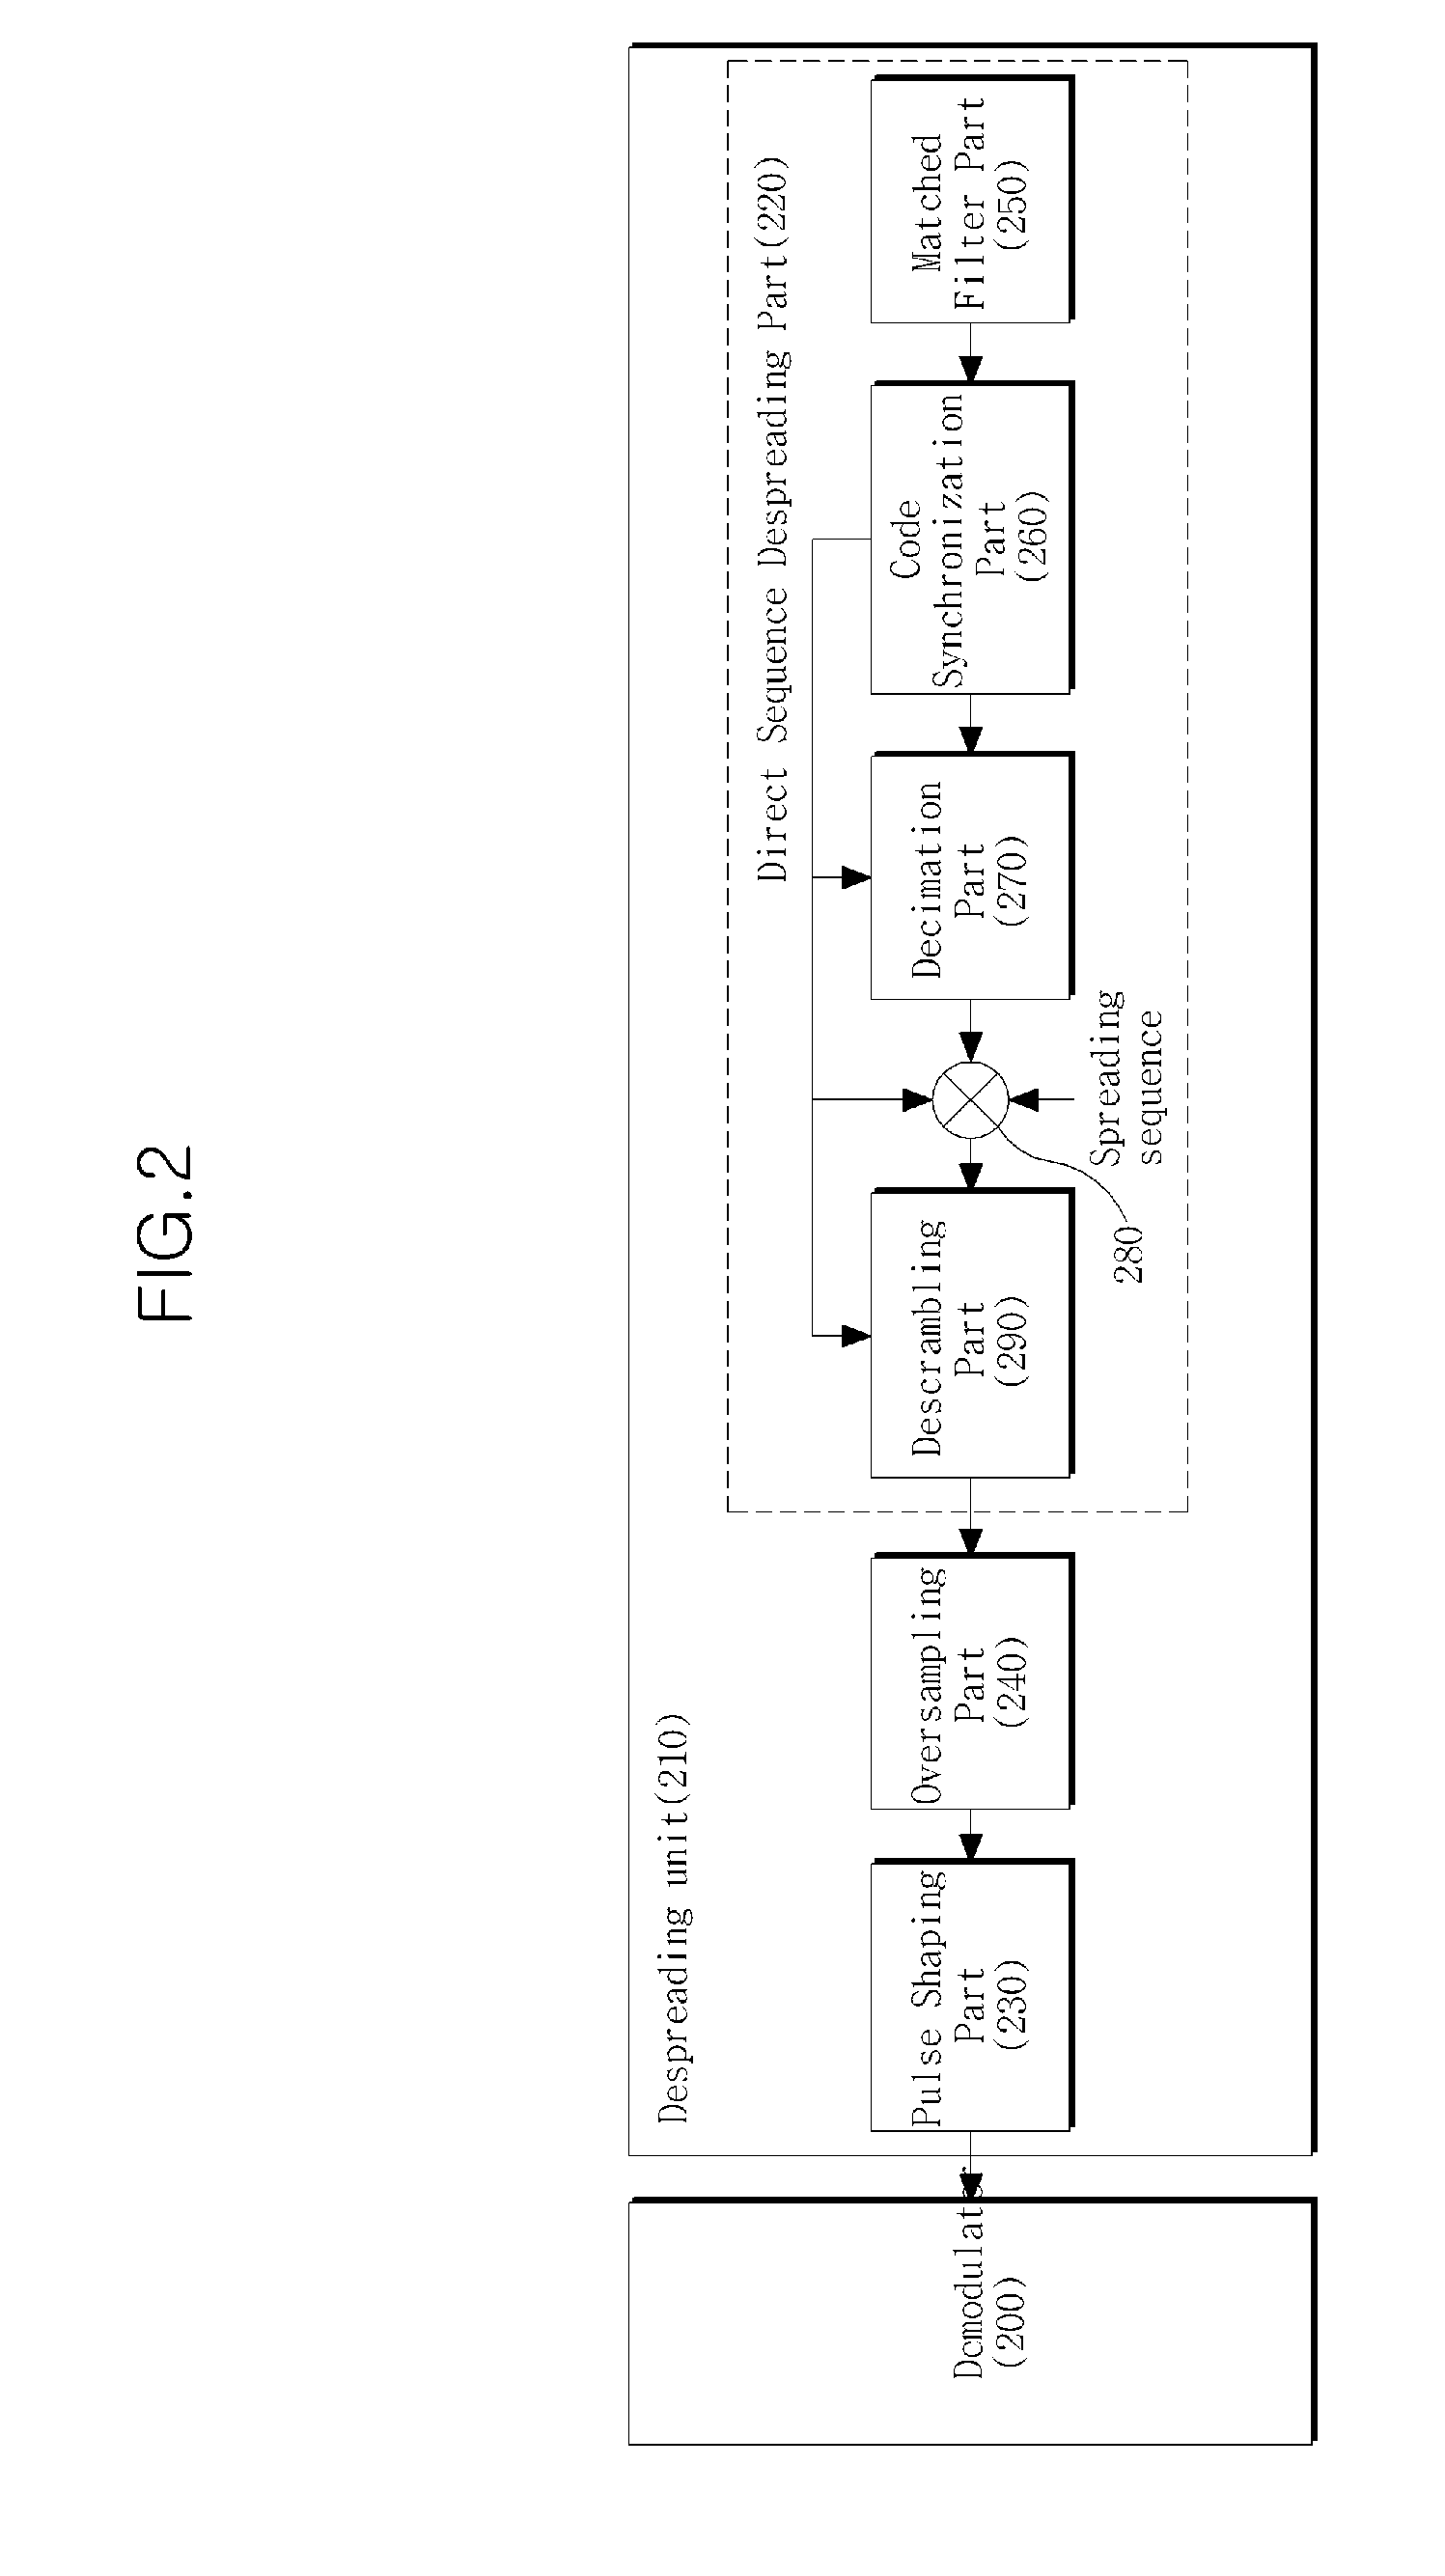 Satellite communication transmitter and receiver for reducing channel interference